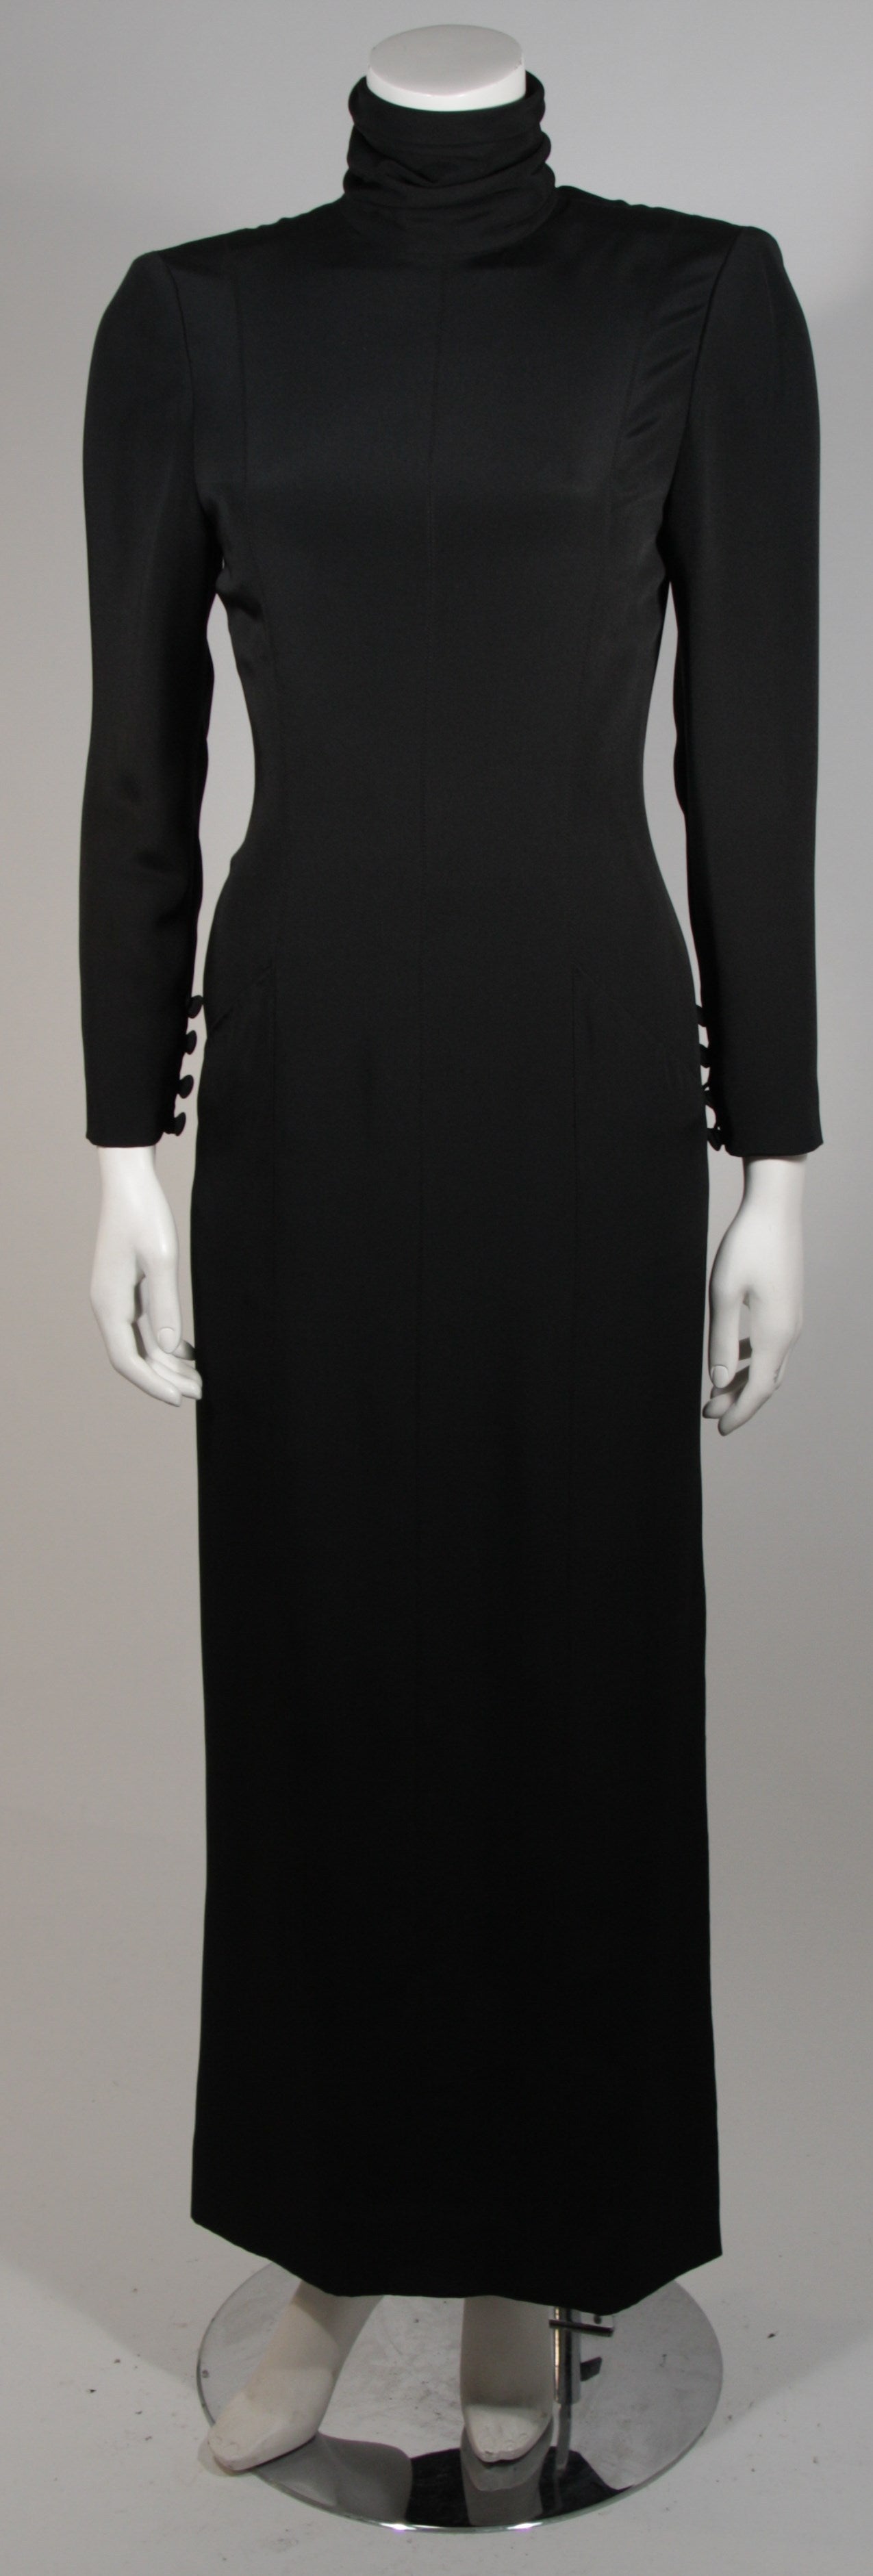 This Chanel gown is available for viewing at our Beverly Hills Boutique. The gown is composed of a black silk and features long sleeves with a high neck and gold button accents. There is center back zipper for ease of access. The piece is numbered.